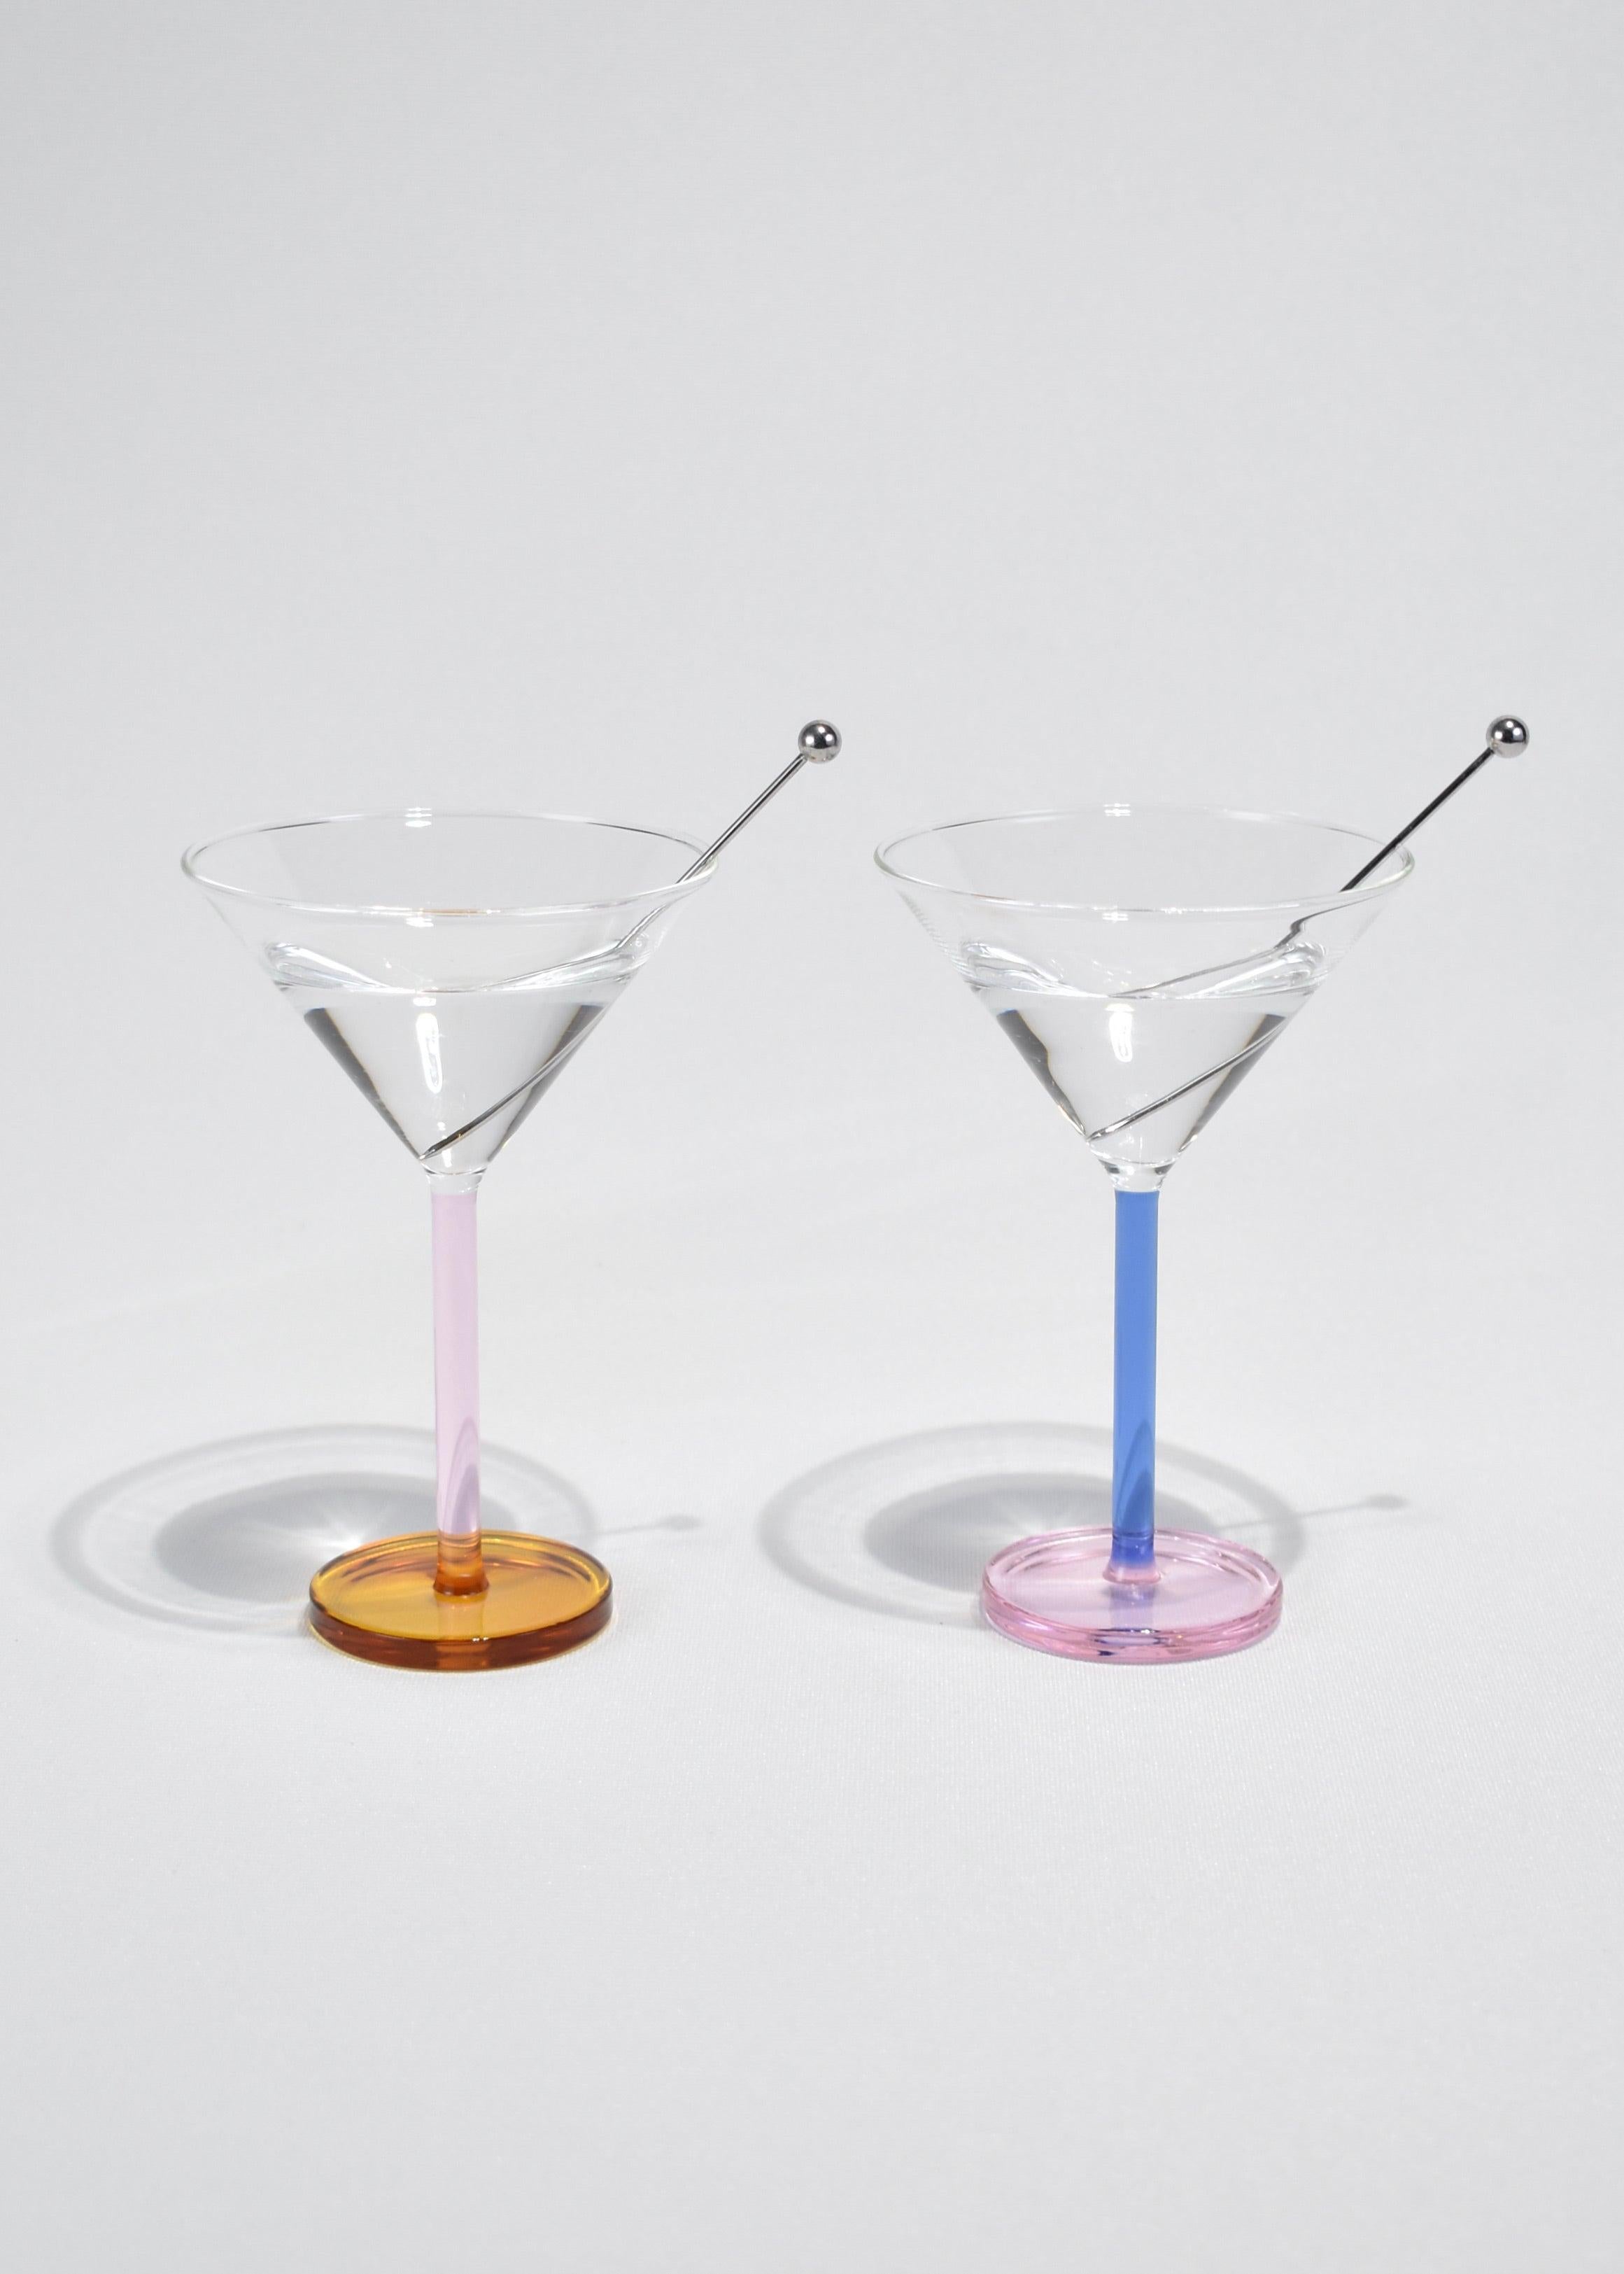 Colorful cocktail glass set of two with stainless steel garnish skewers. Designed by Sophie Lou Jacobsen in New York.

Made of lightweight and durable borosilicate glass. Cups are heat and cold resistant, and dishwasher safe. Each holds 3.5 oz. of